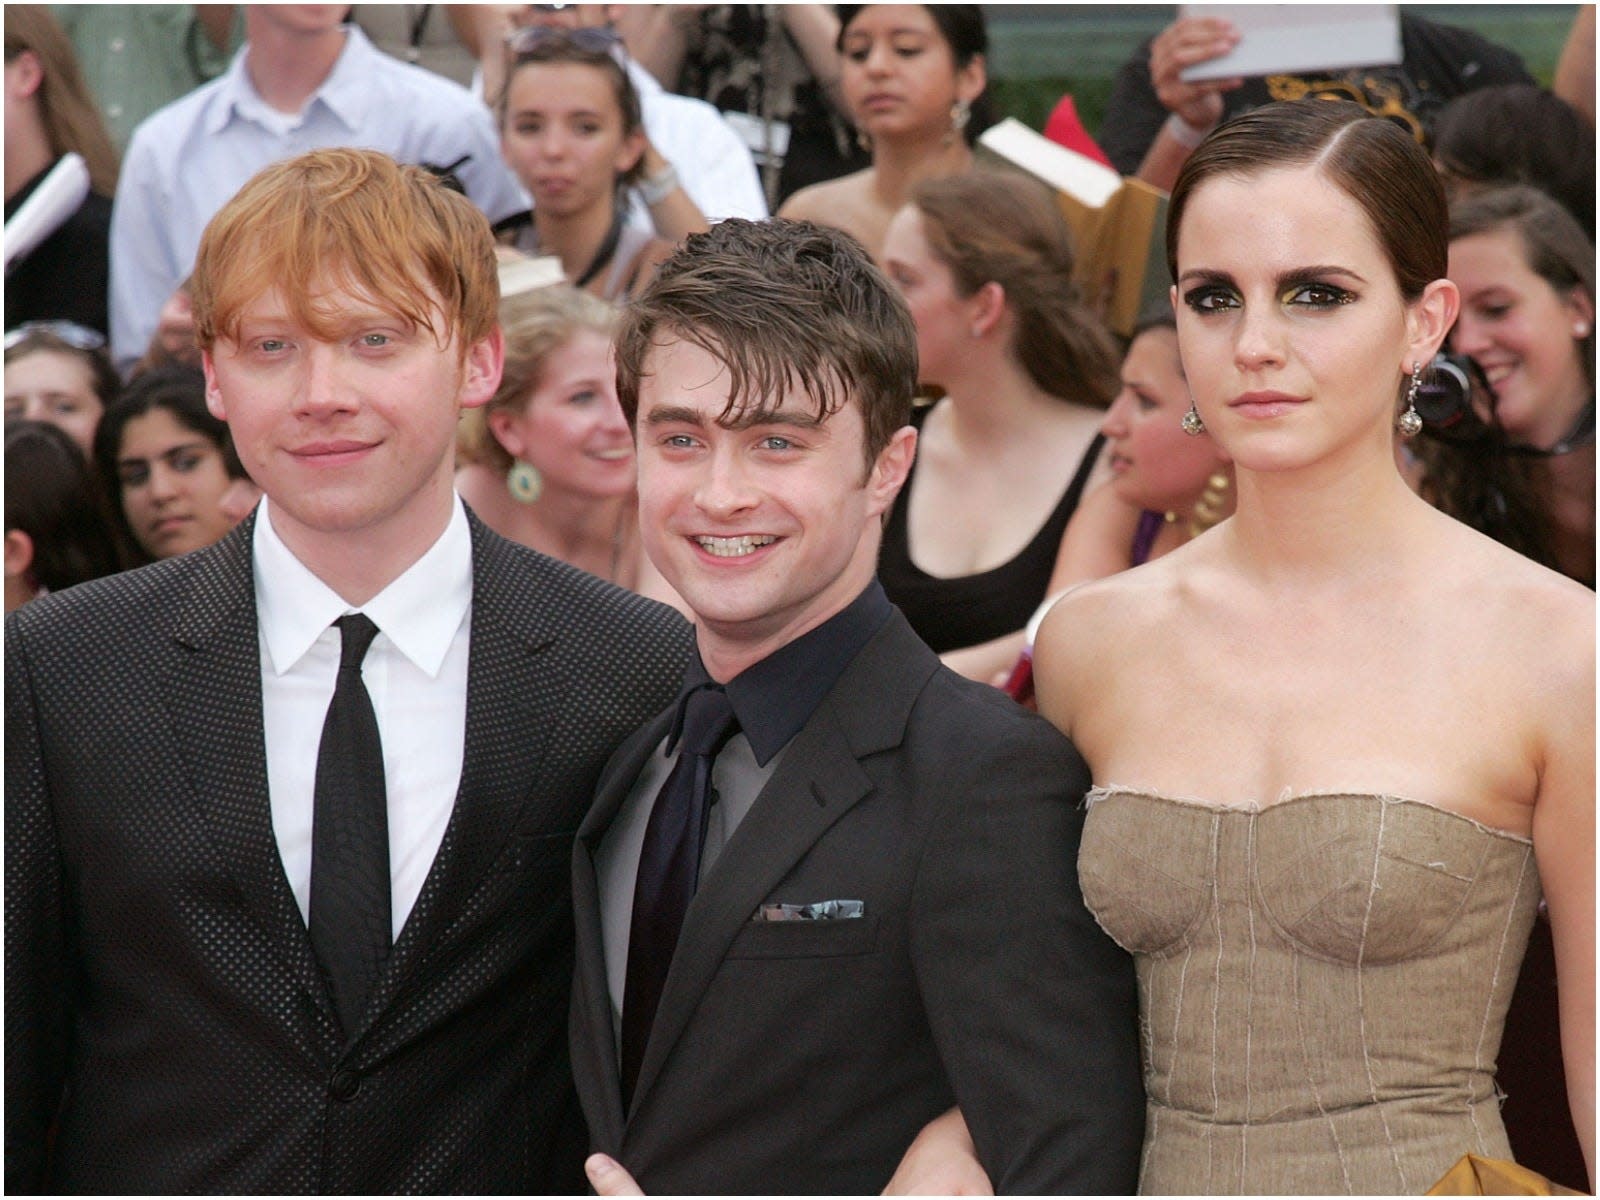 Rupert Grint says fame is the only thing he, Emma Watson and Daniel Radcliffe never talk about together